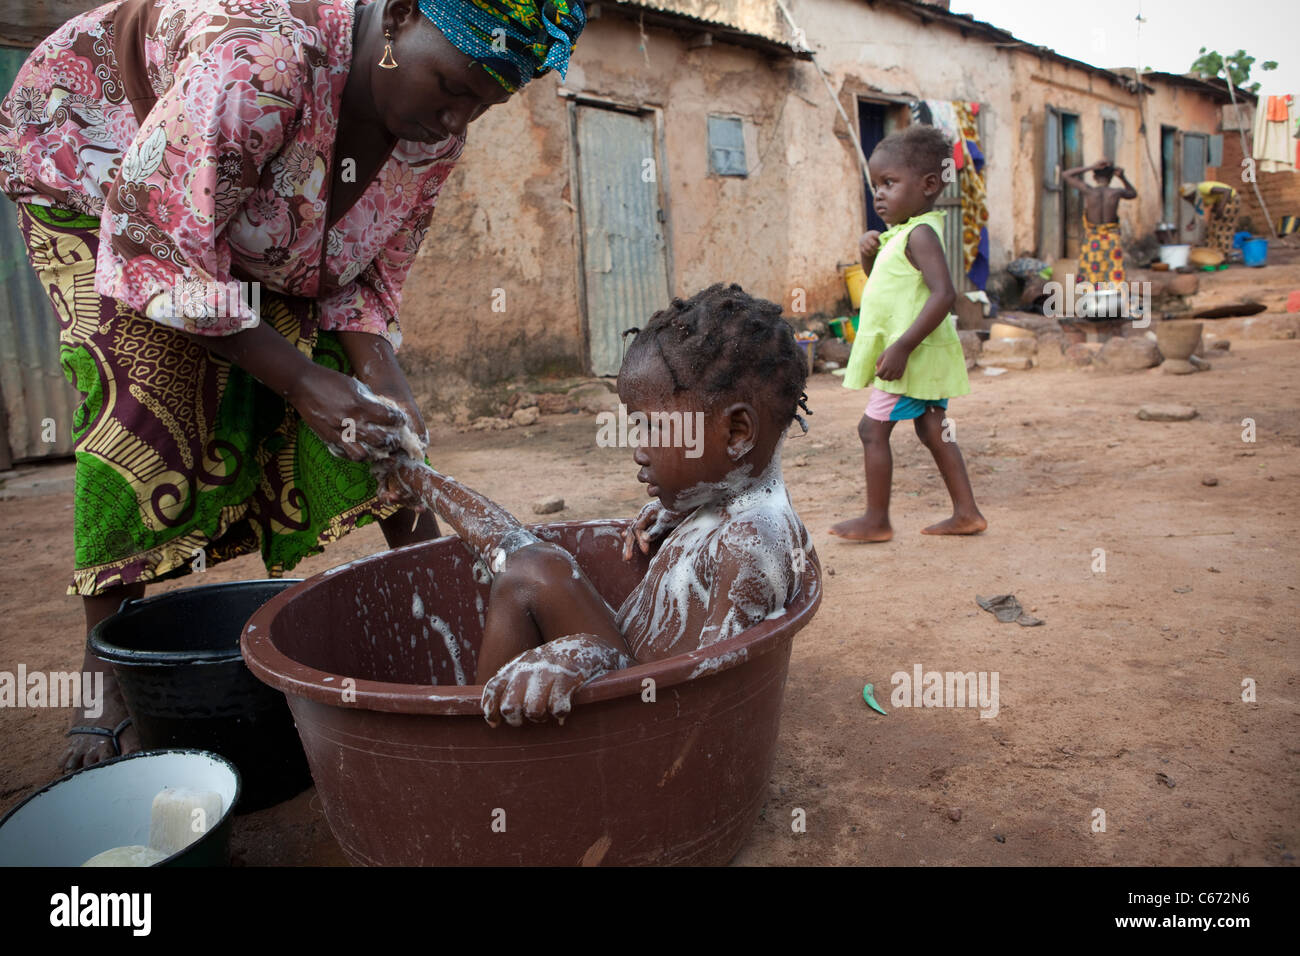 A mother bathes her child in a slum in Bamako, Mali, West Africa. Stock Photo